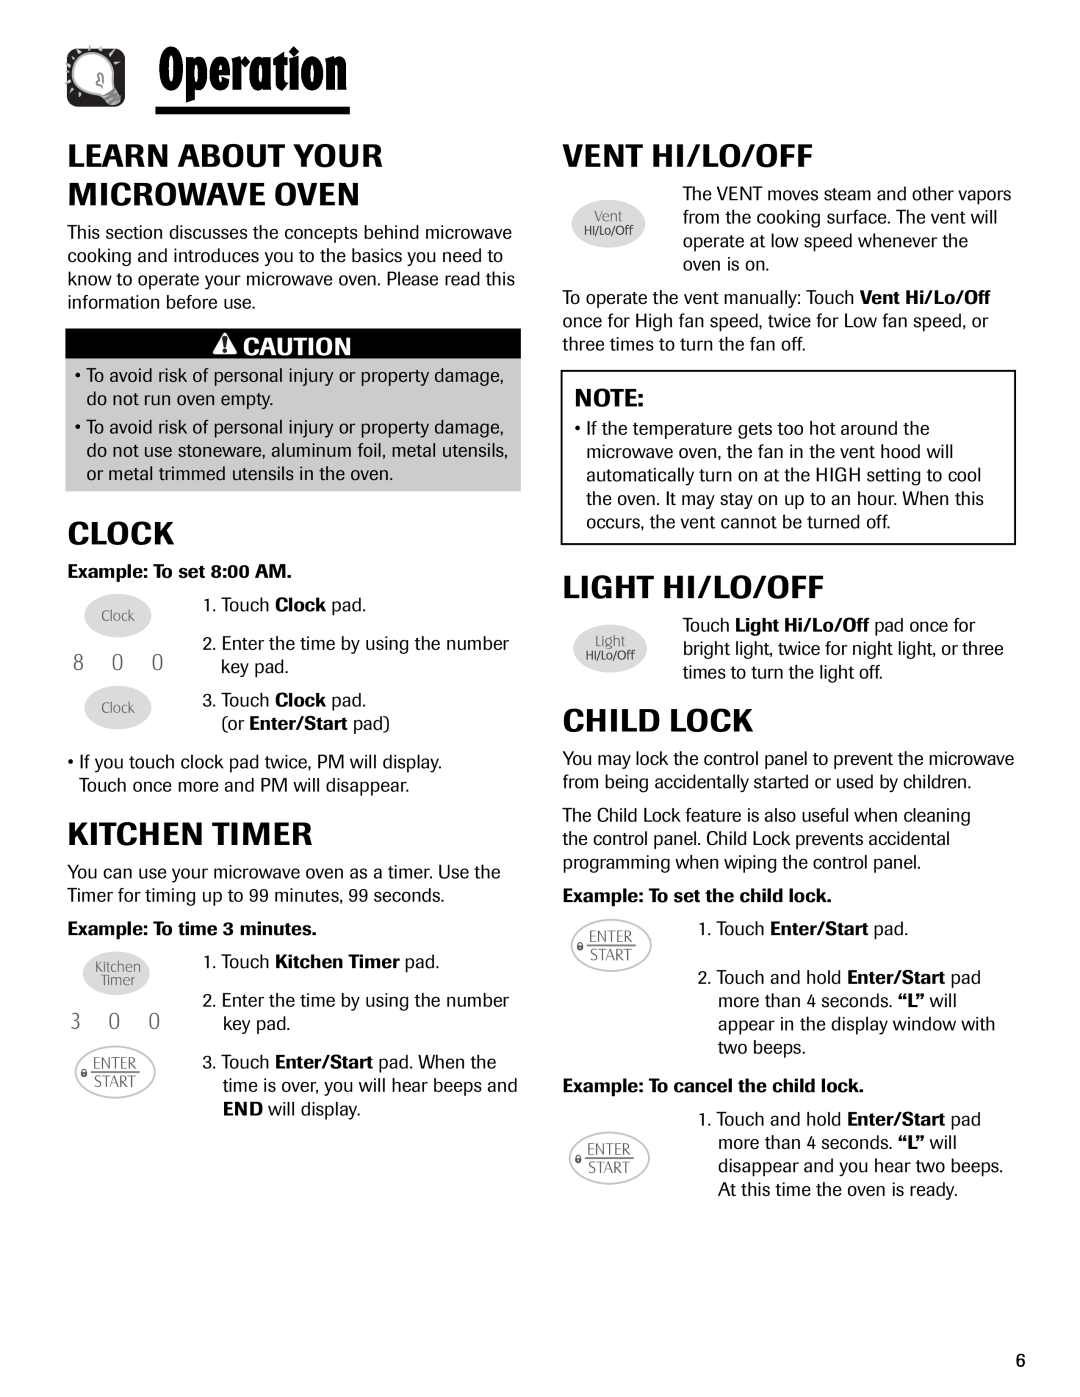 Maytag MMV1153AA Operation, Learn About Your Microwave Oven, Clock, Kitchen Timer, Vent Hi/Lo/Off, Light Hi/Lo/Off 